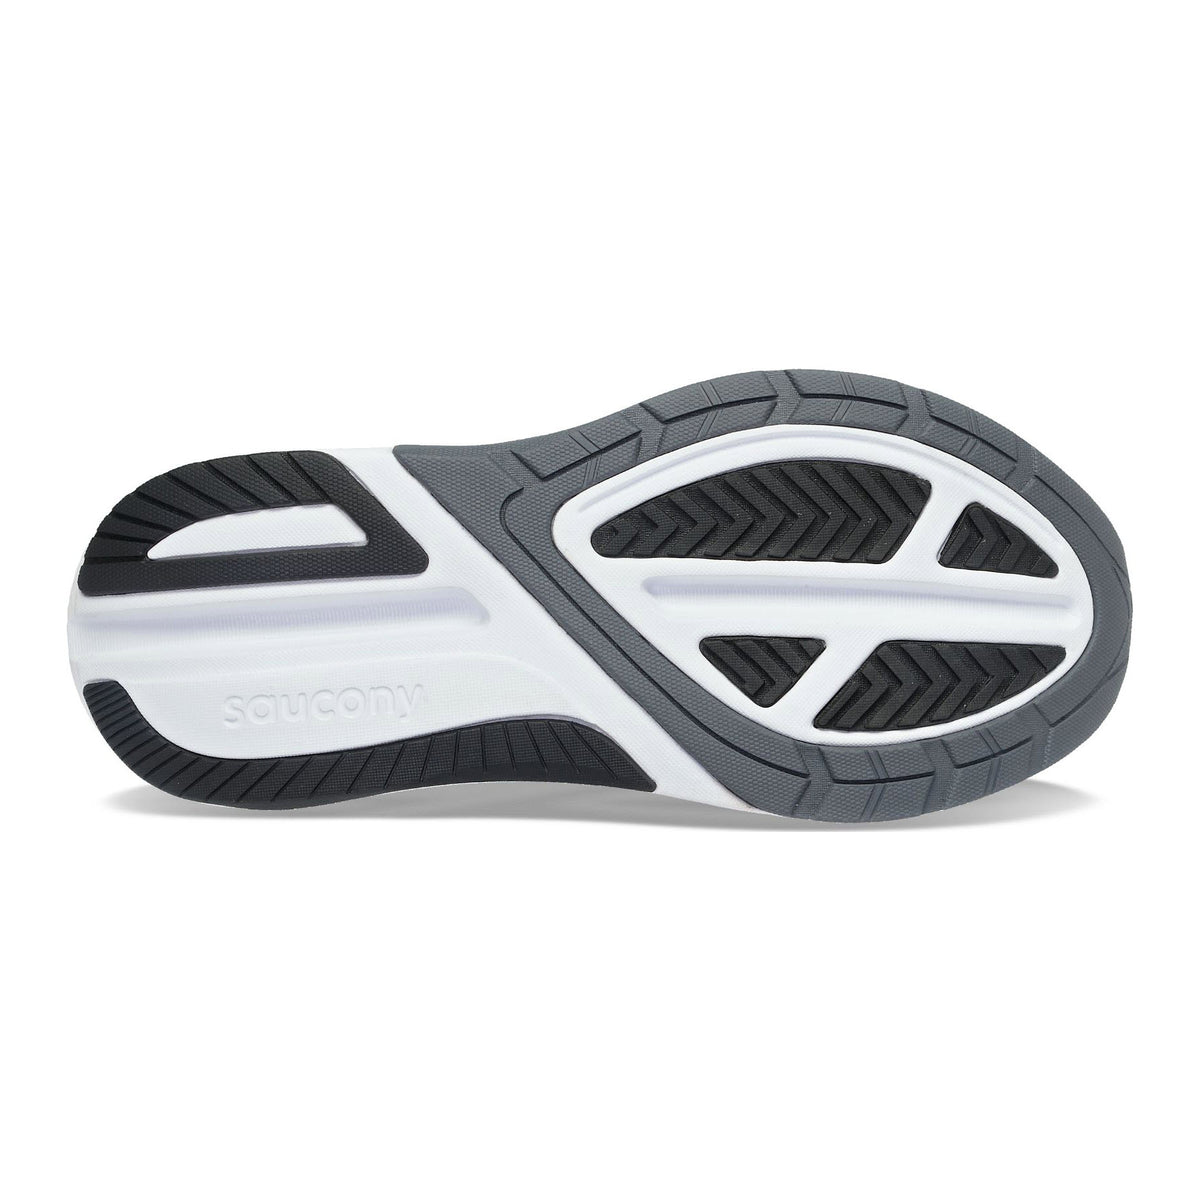 Sole of a Saucony SAUCONY ECHELON 9 BLACK/WHITE - WOMENS running shoe showcasing a gray and white tread pattern with logo.